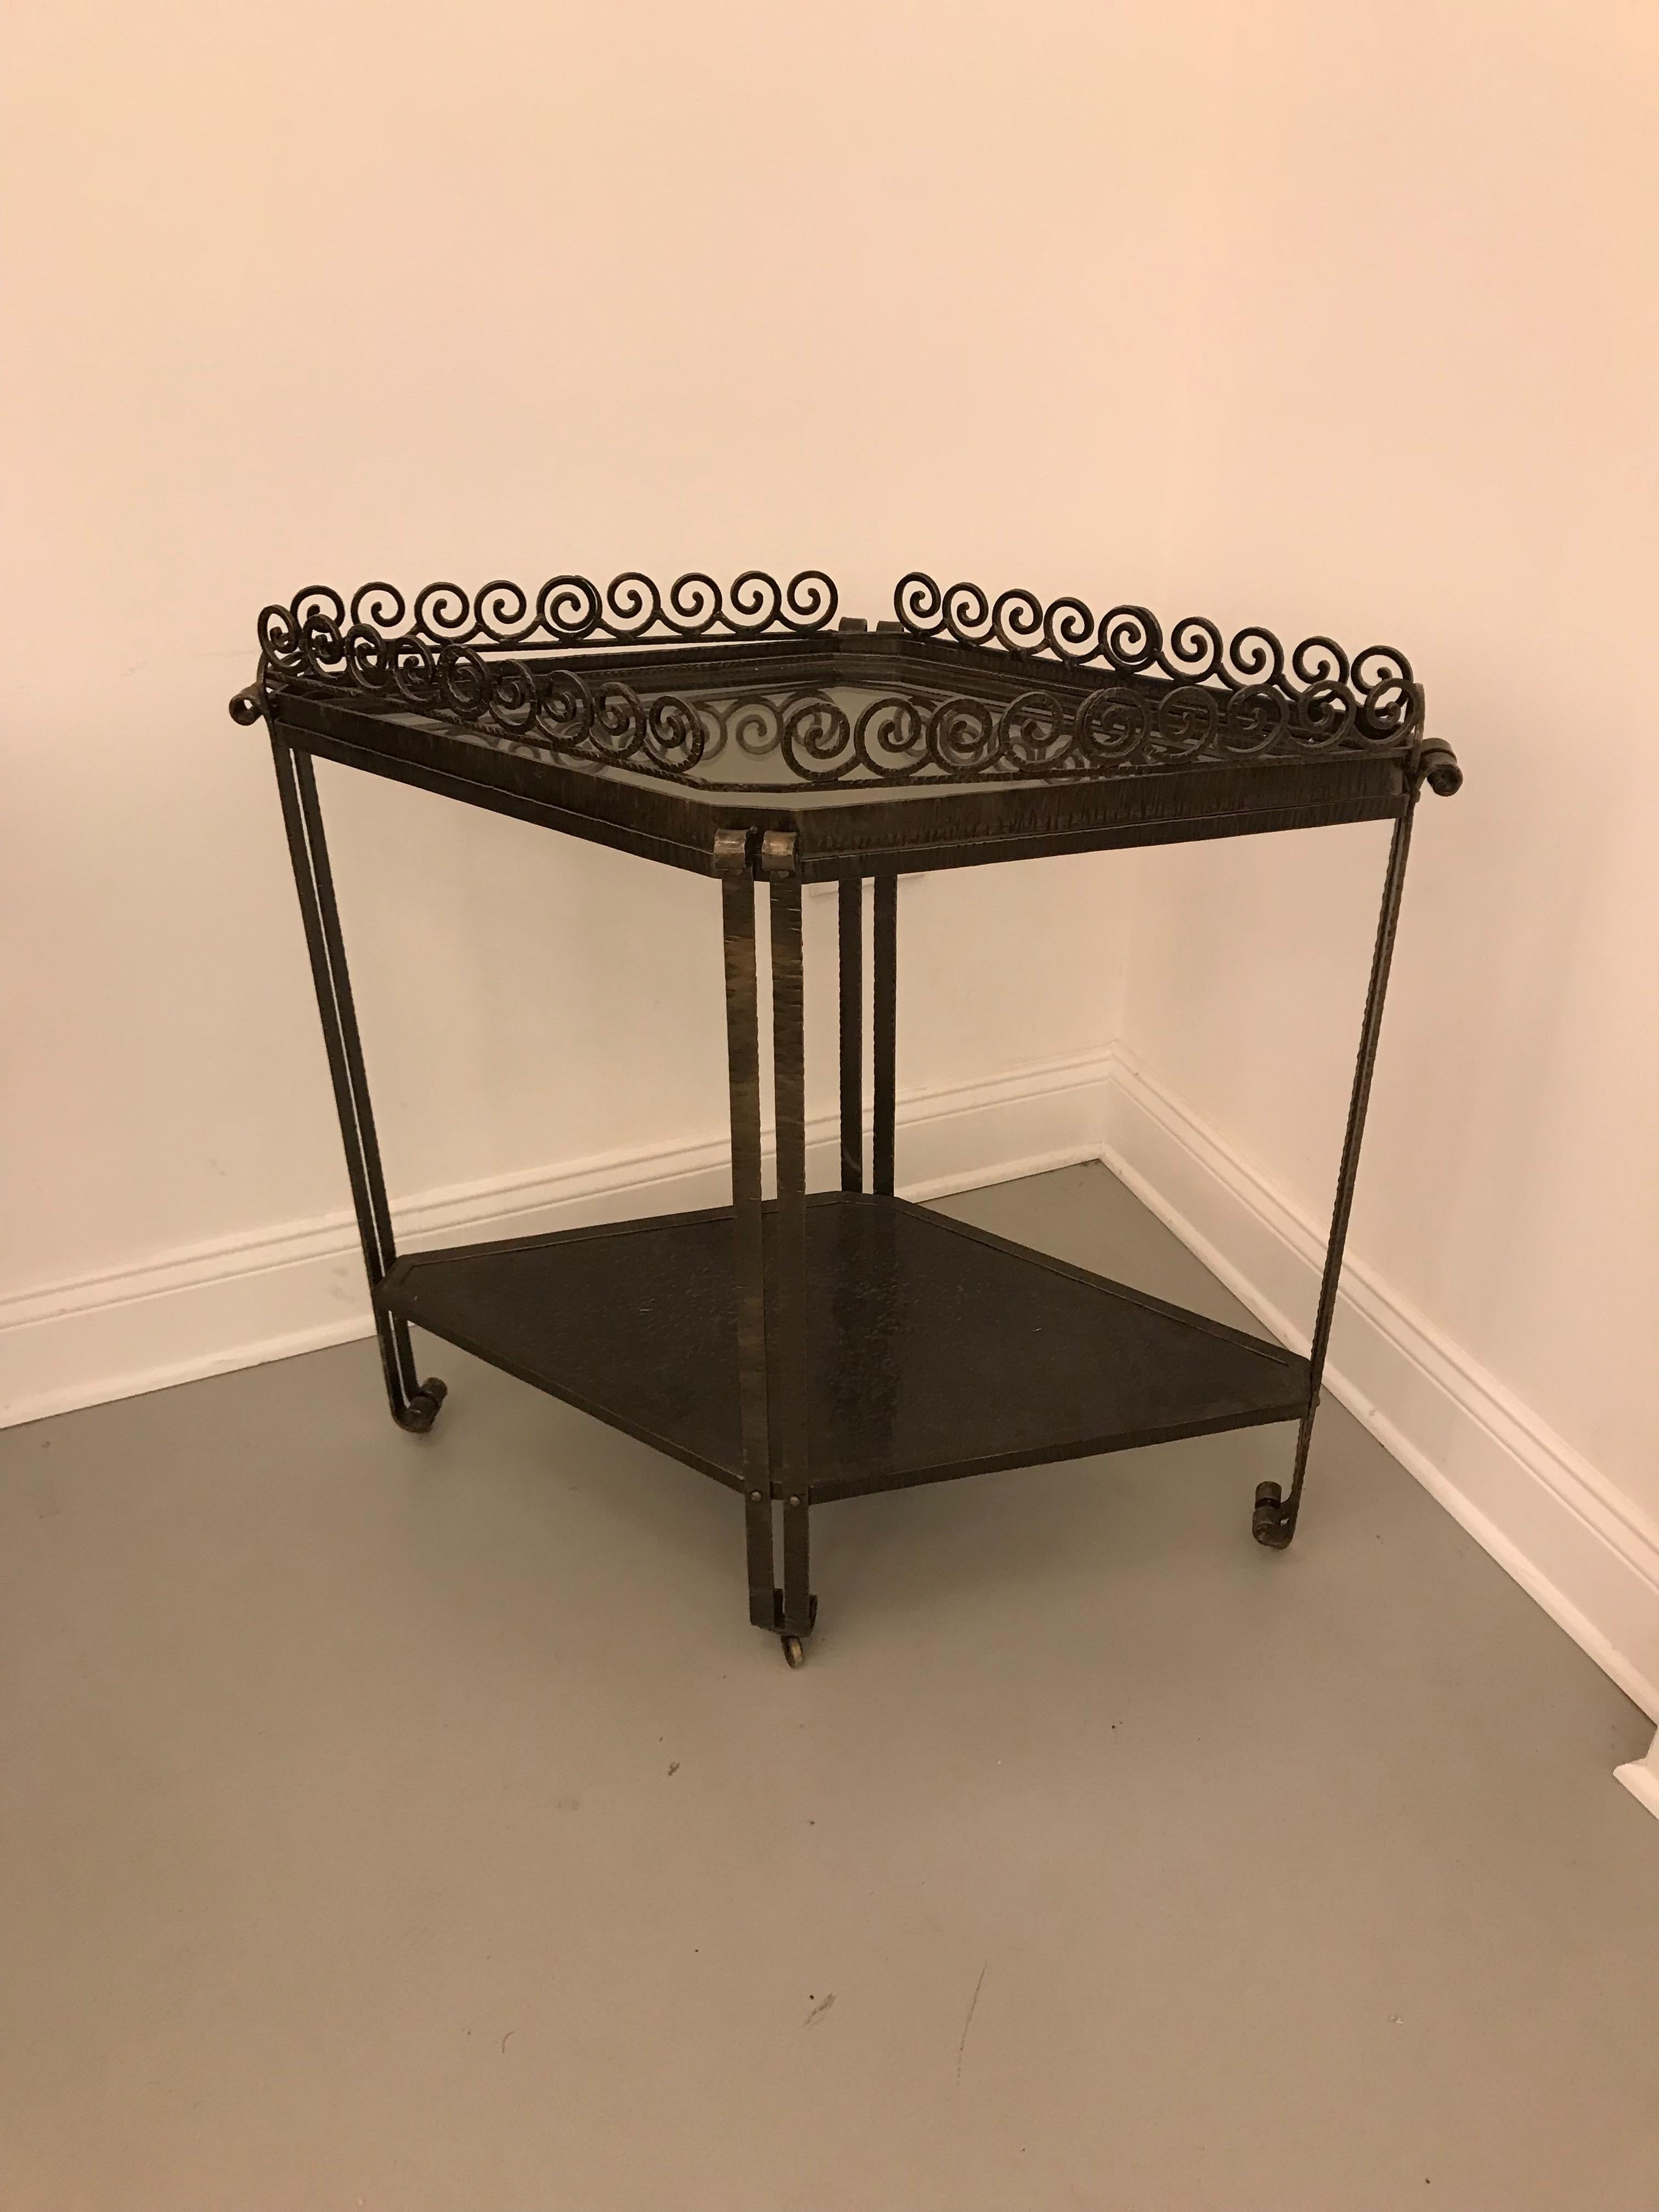 French Art Deco wrought iron diamond accent table. Having two tiers with removable glass top for serving. Beautiful hammered deco details. Dry bar or bar cart.